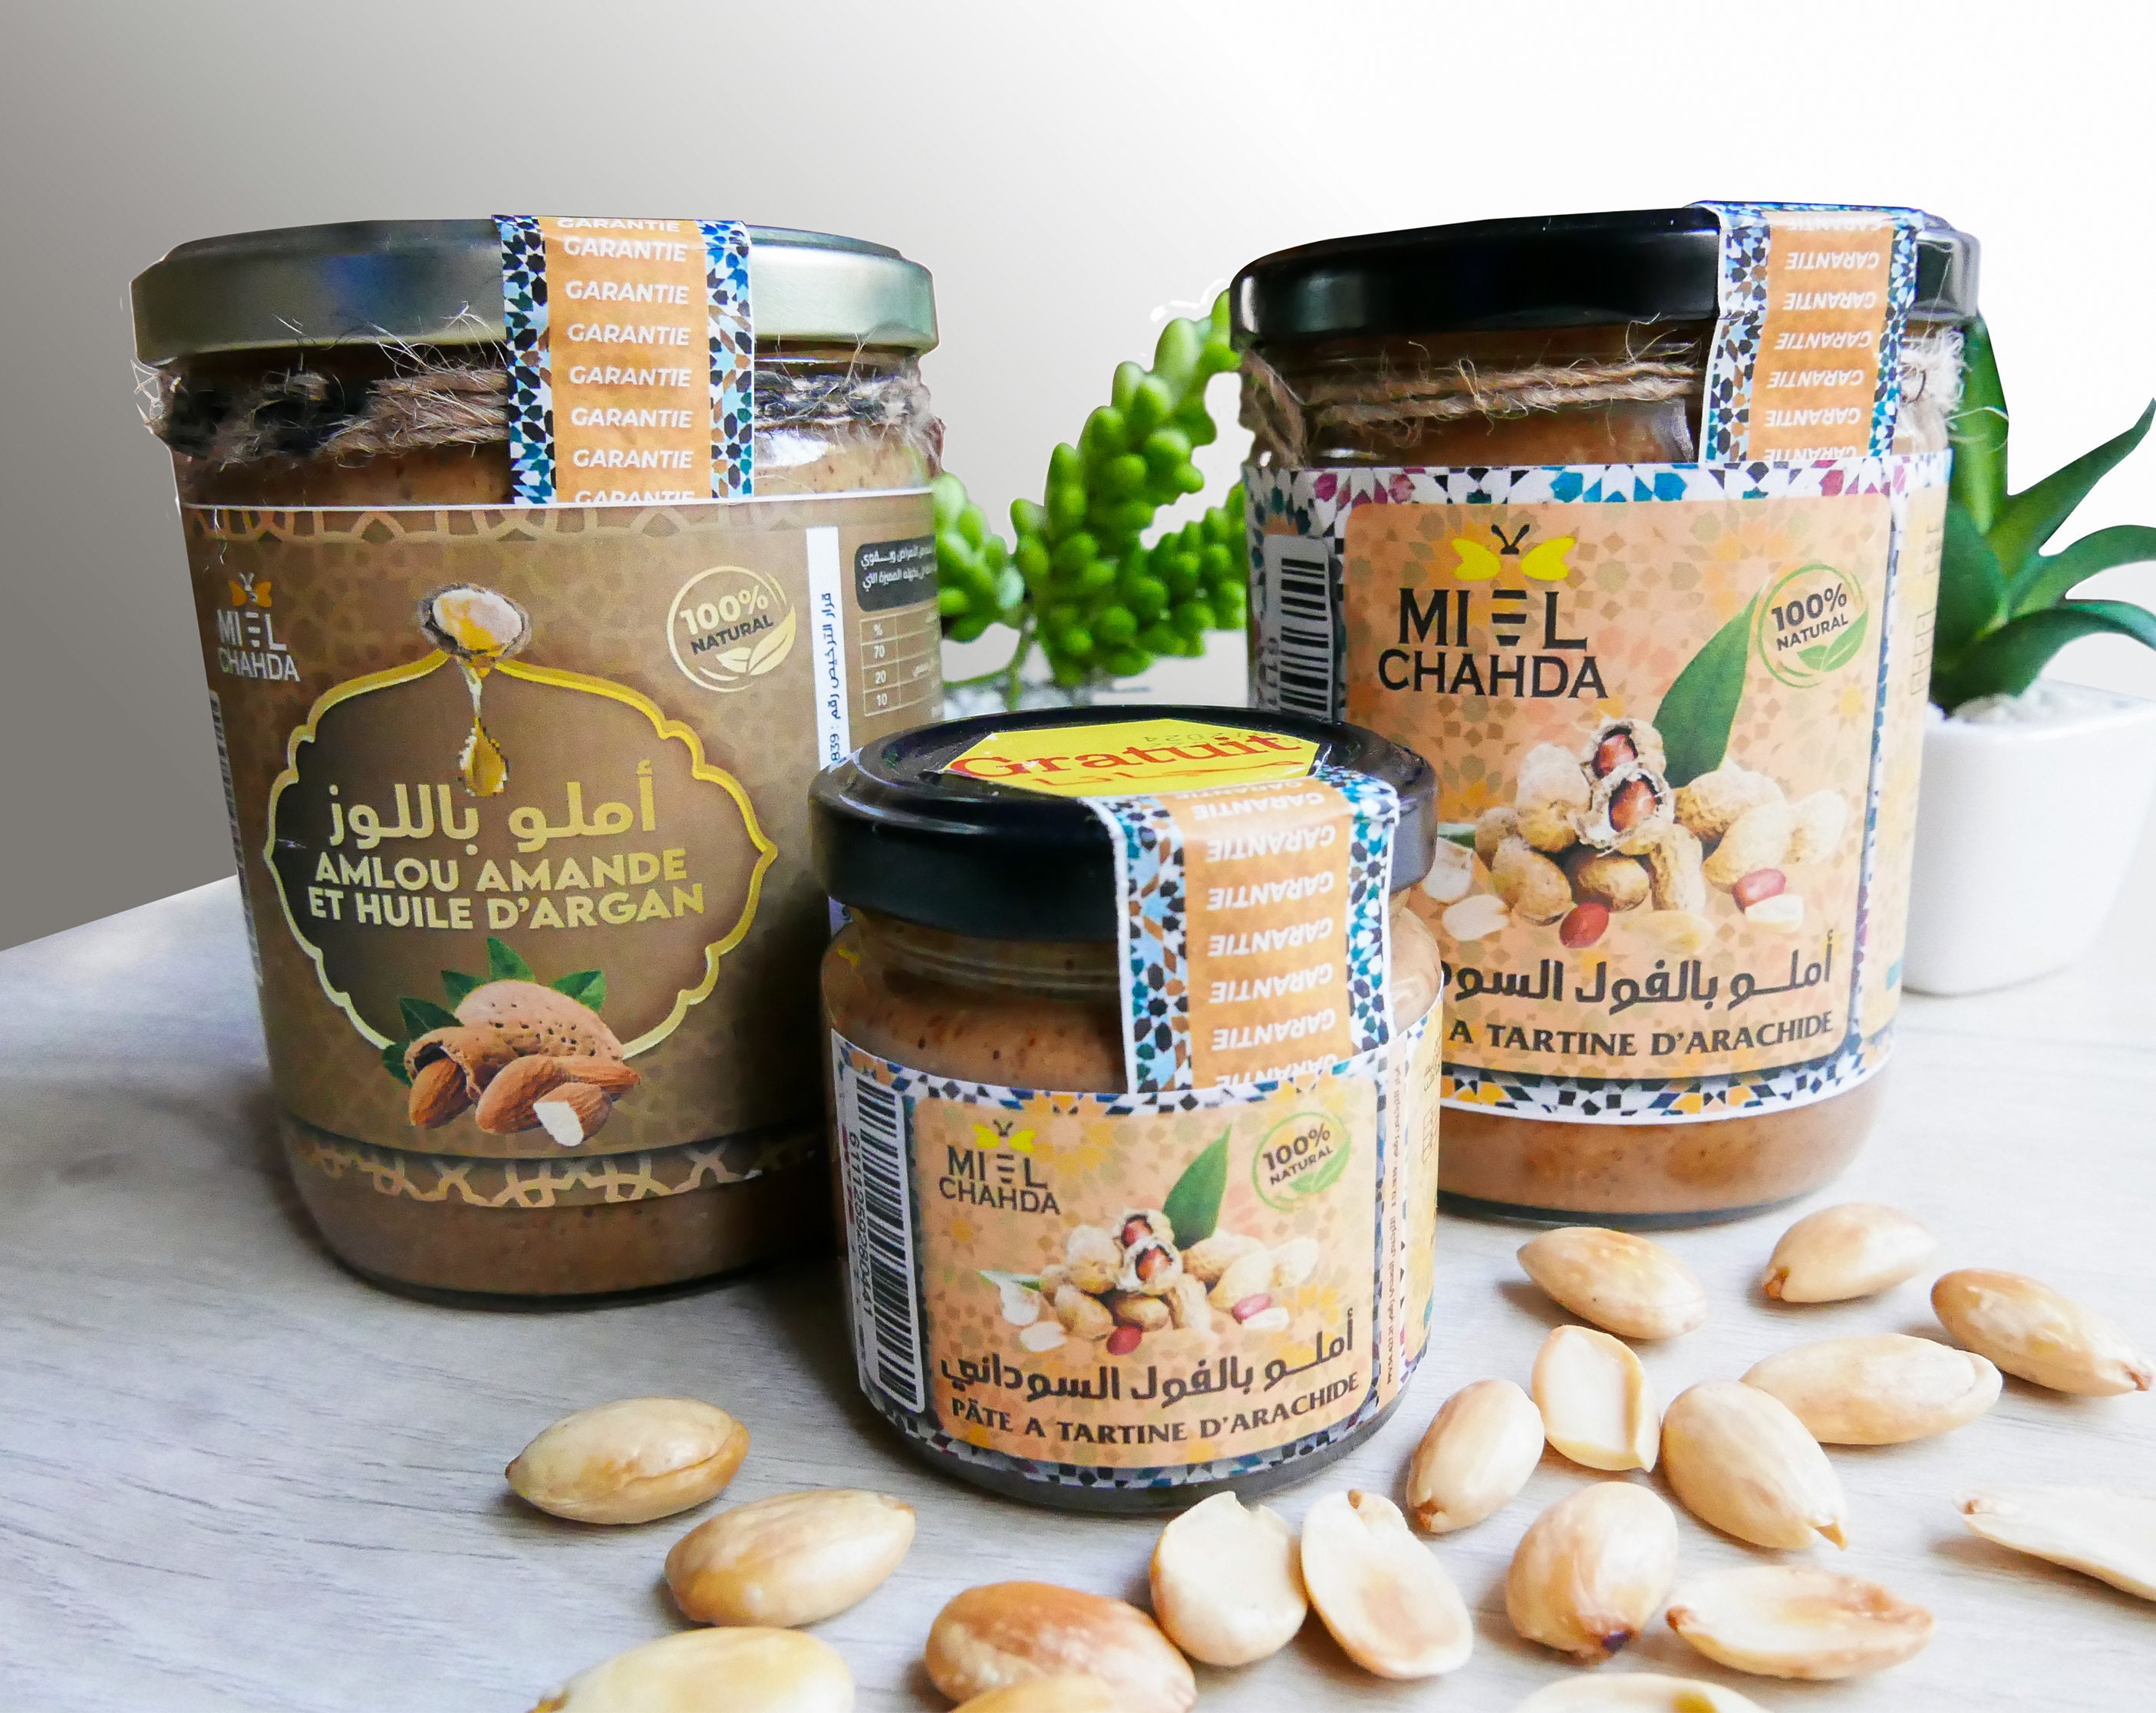 Moroccan Amlou I Natural spread par excellence Weight 200 g